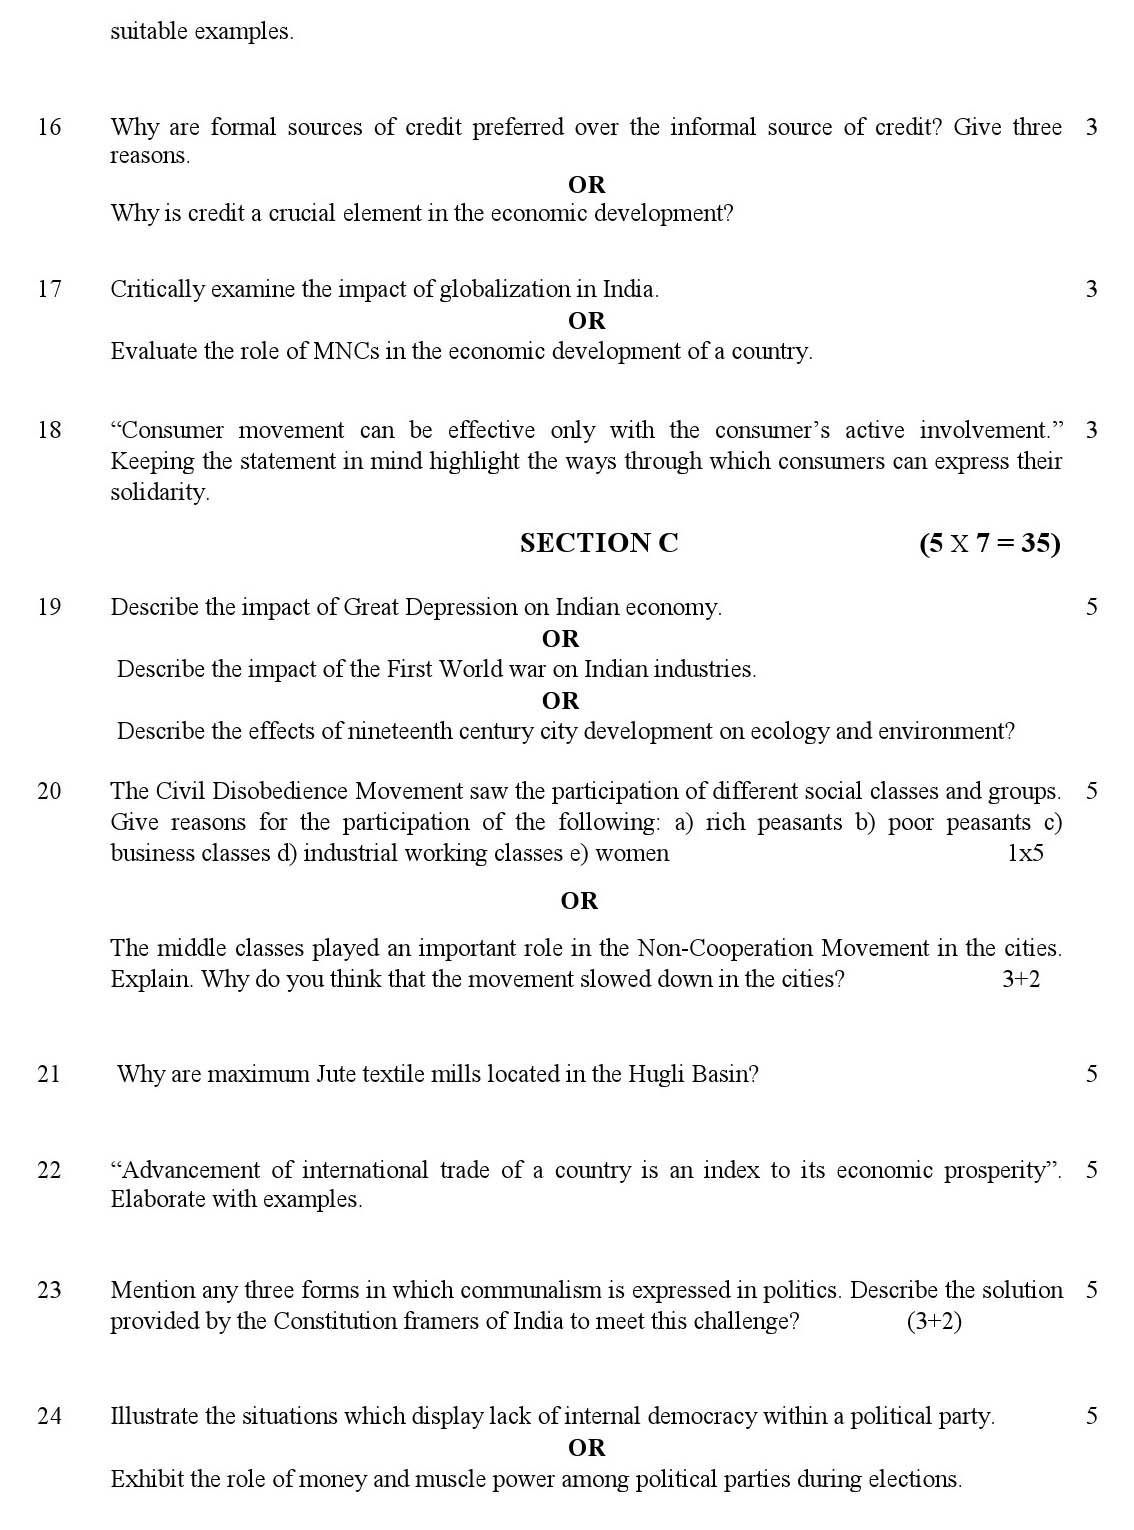 Social Science CBSE Class X Sample Question Paper 2018-19 - Image 3